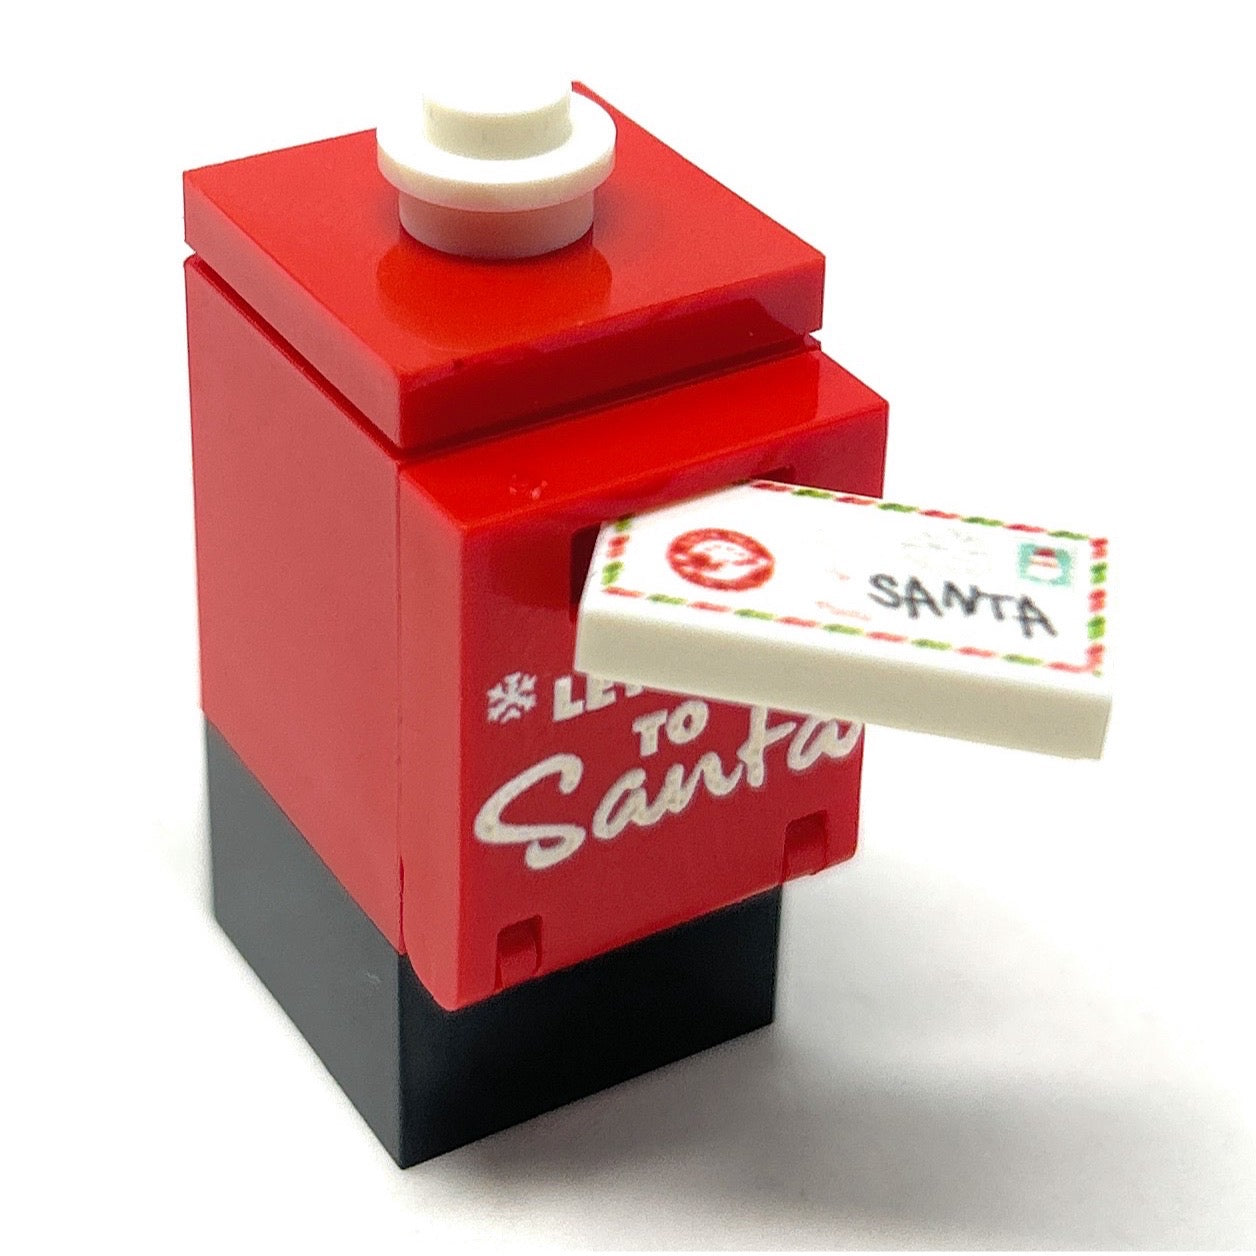 Letter to Santa Mailbox and Envelope made using LEGO parts - B3 Customs